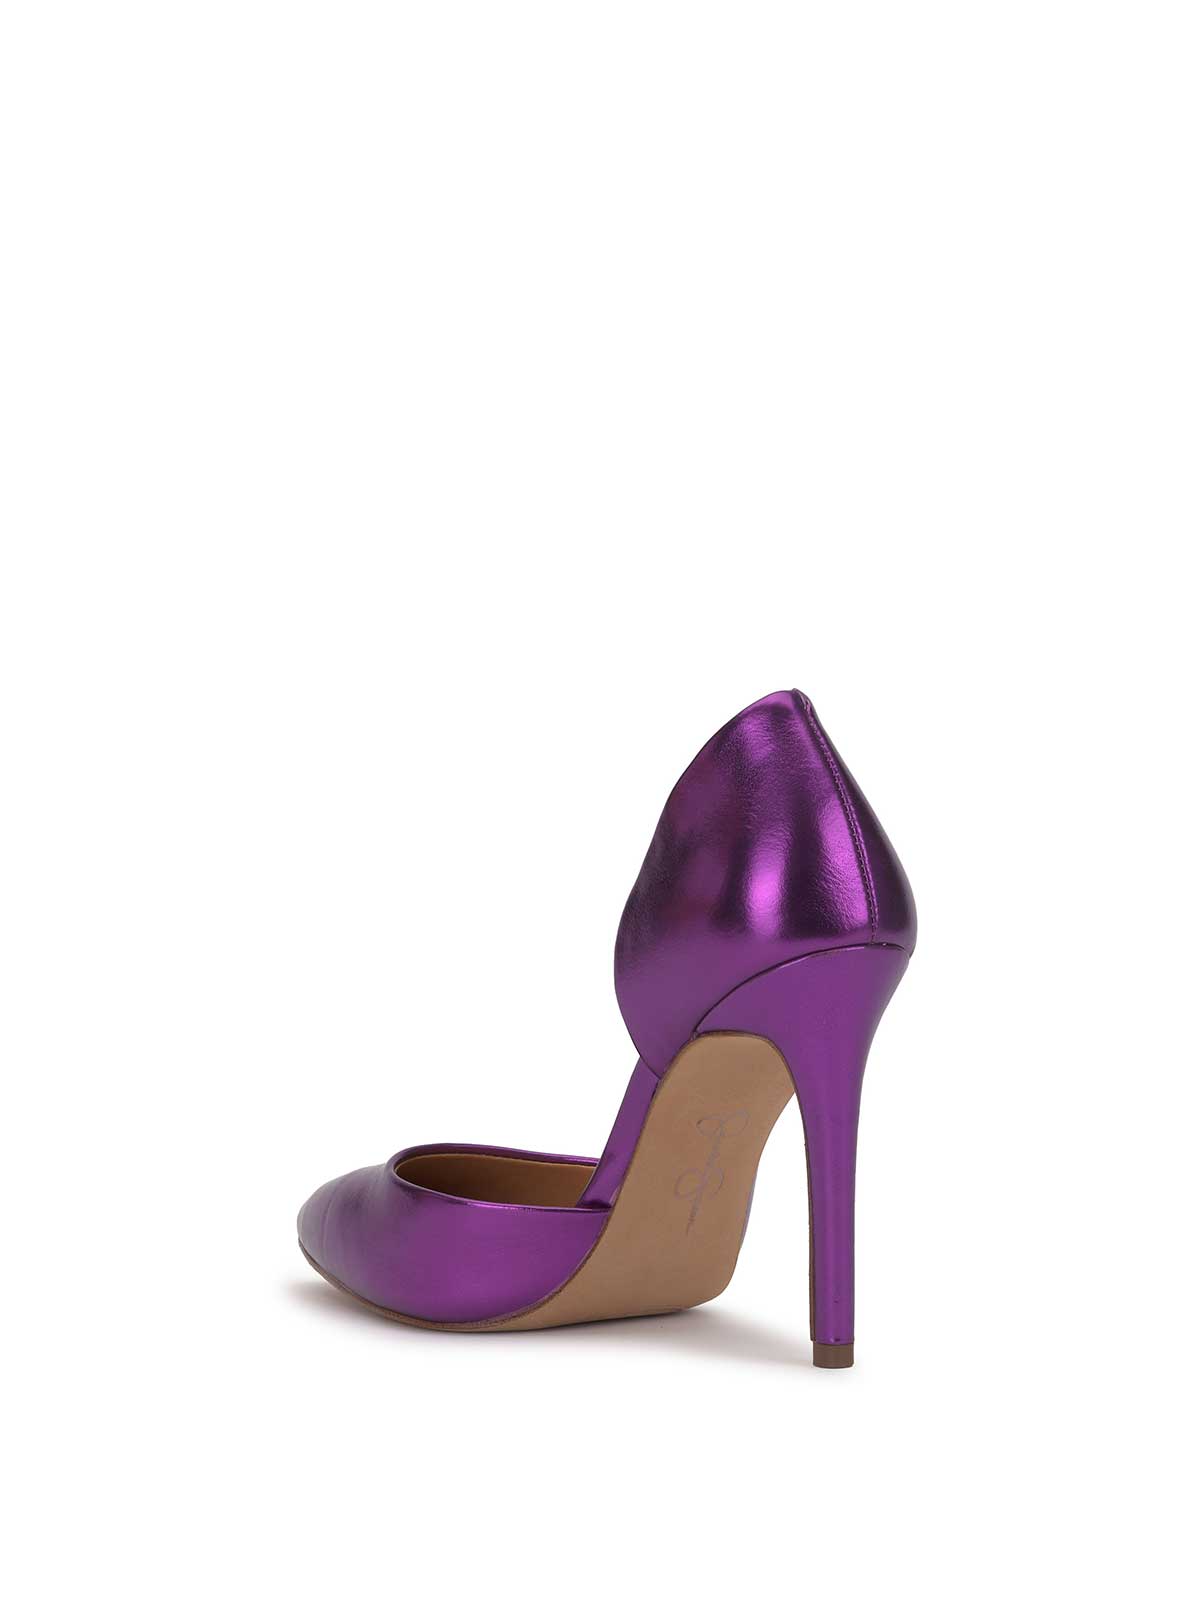 Shop with Janie - High heels from ksh 500 no. 39 and 40.... | Facebook